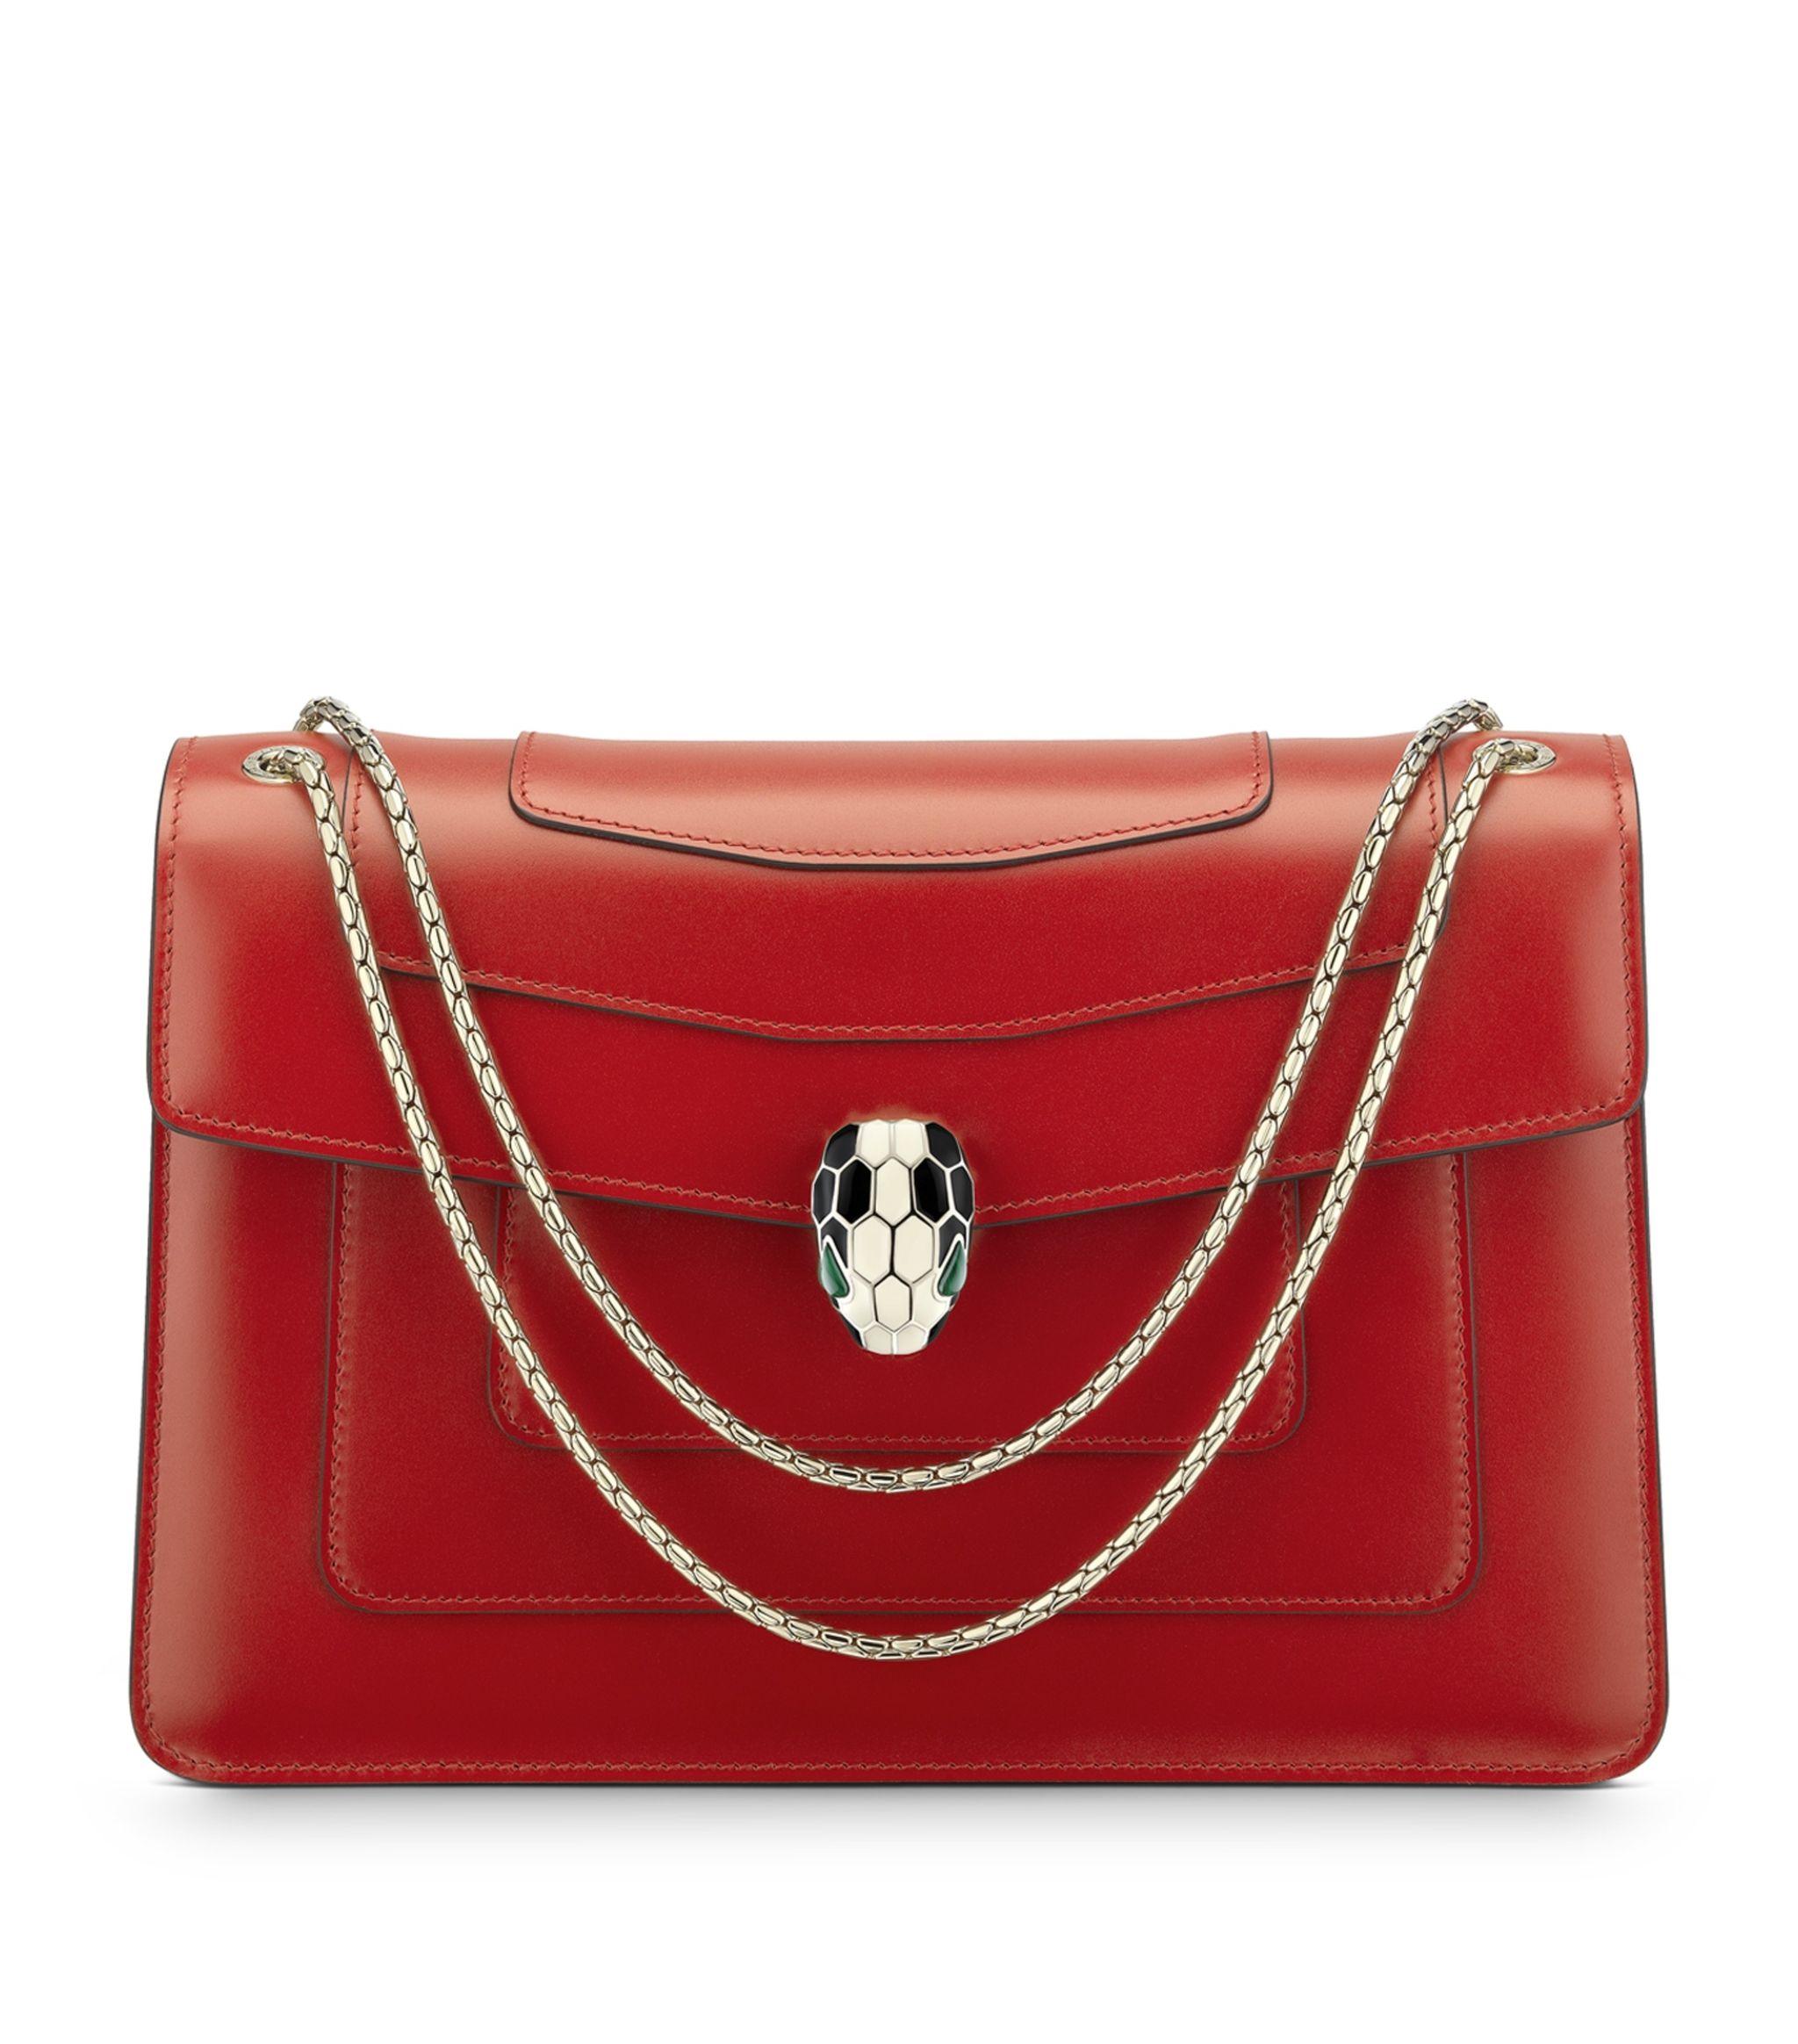 BVLGARI Red Serpenti Forever Leather Shoulder Bag | Lyst